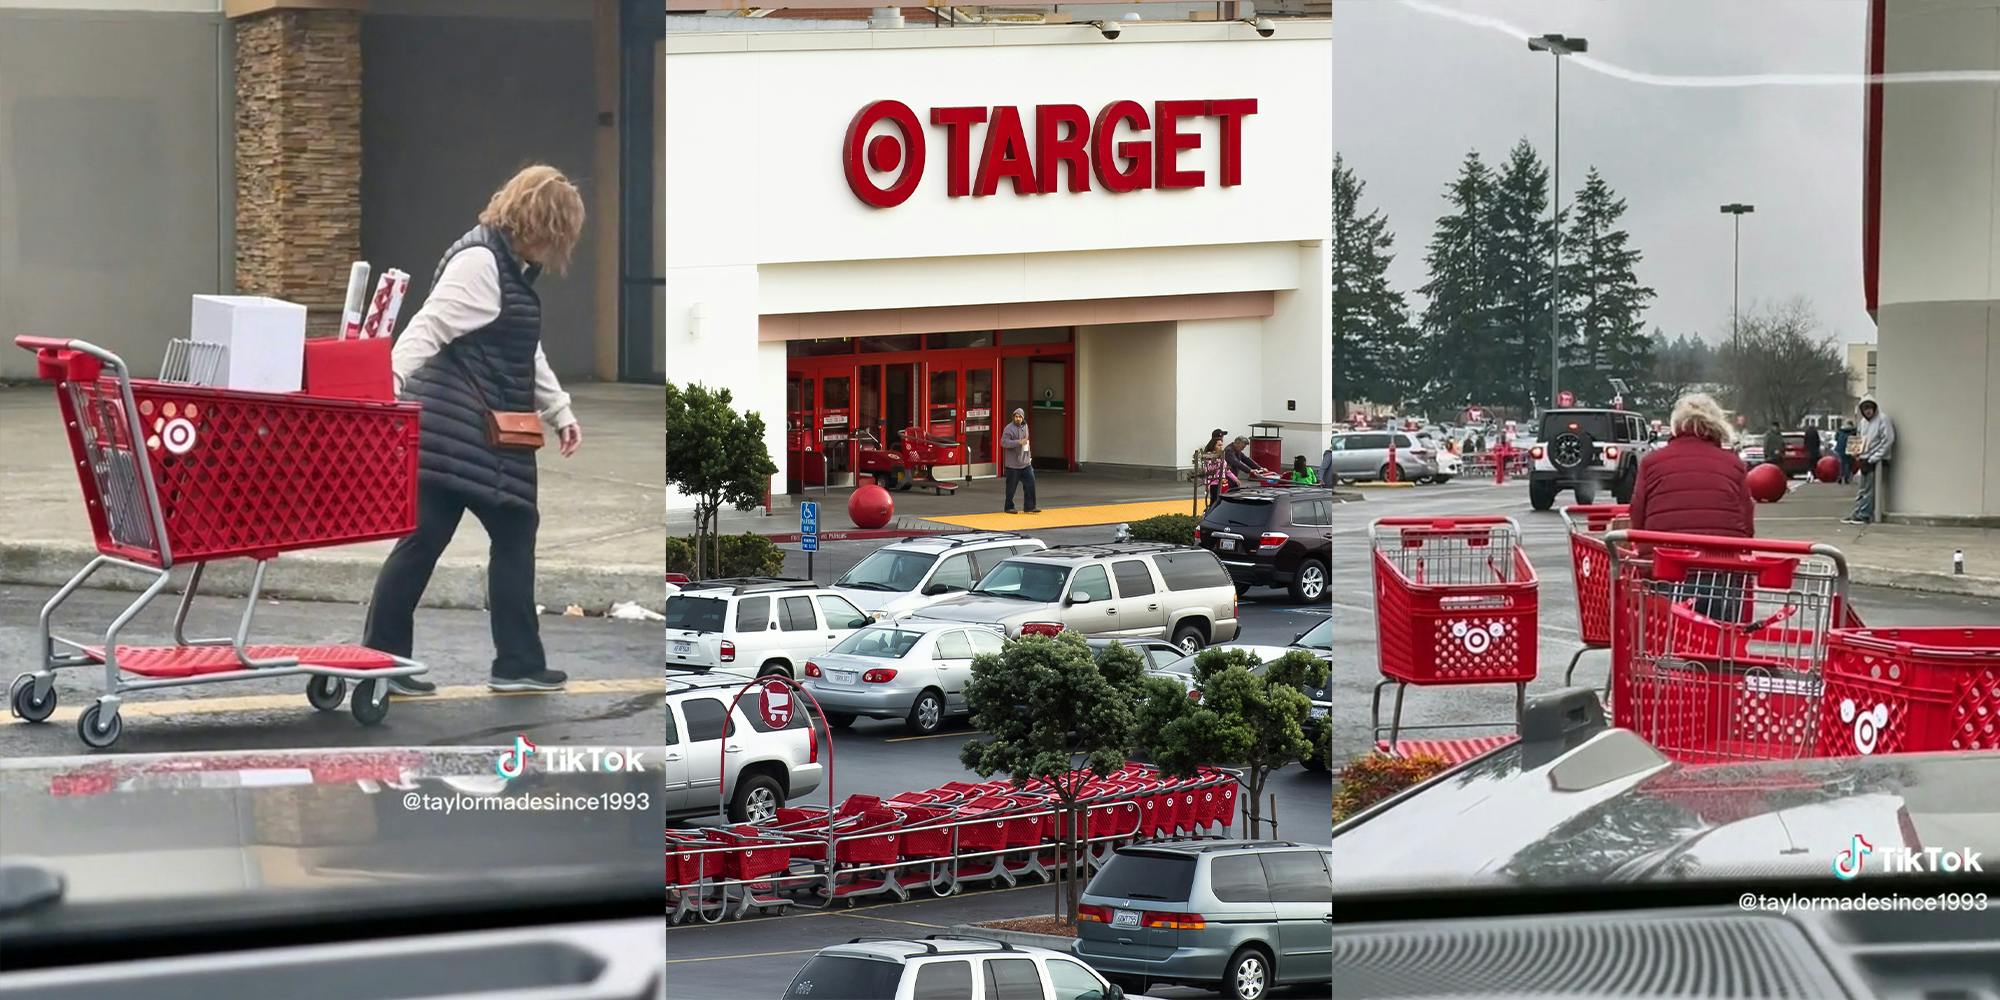 People flock to the RIM to shop at Target during snow day